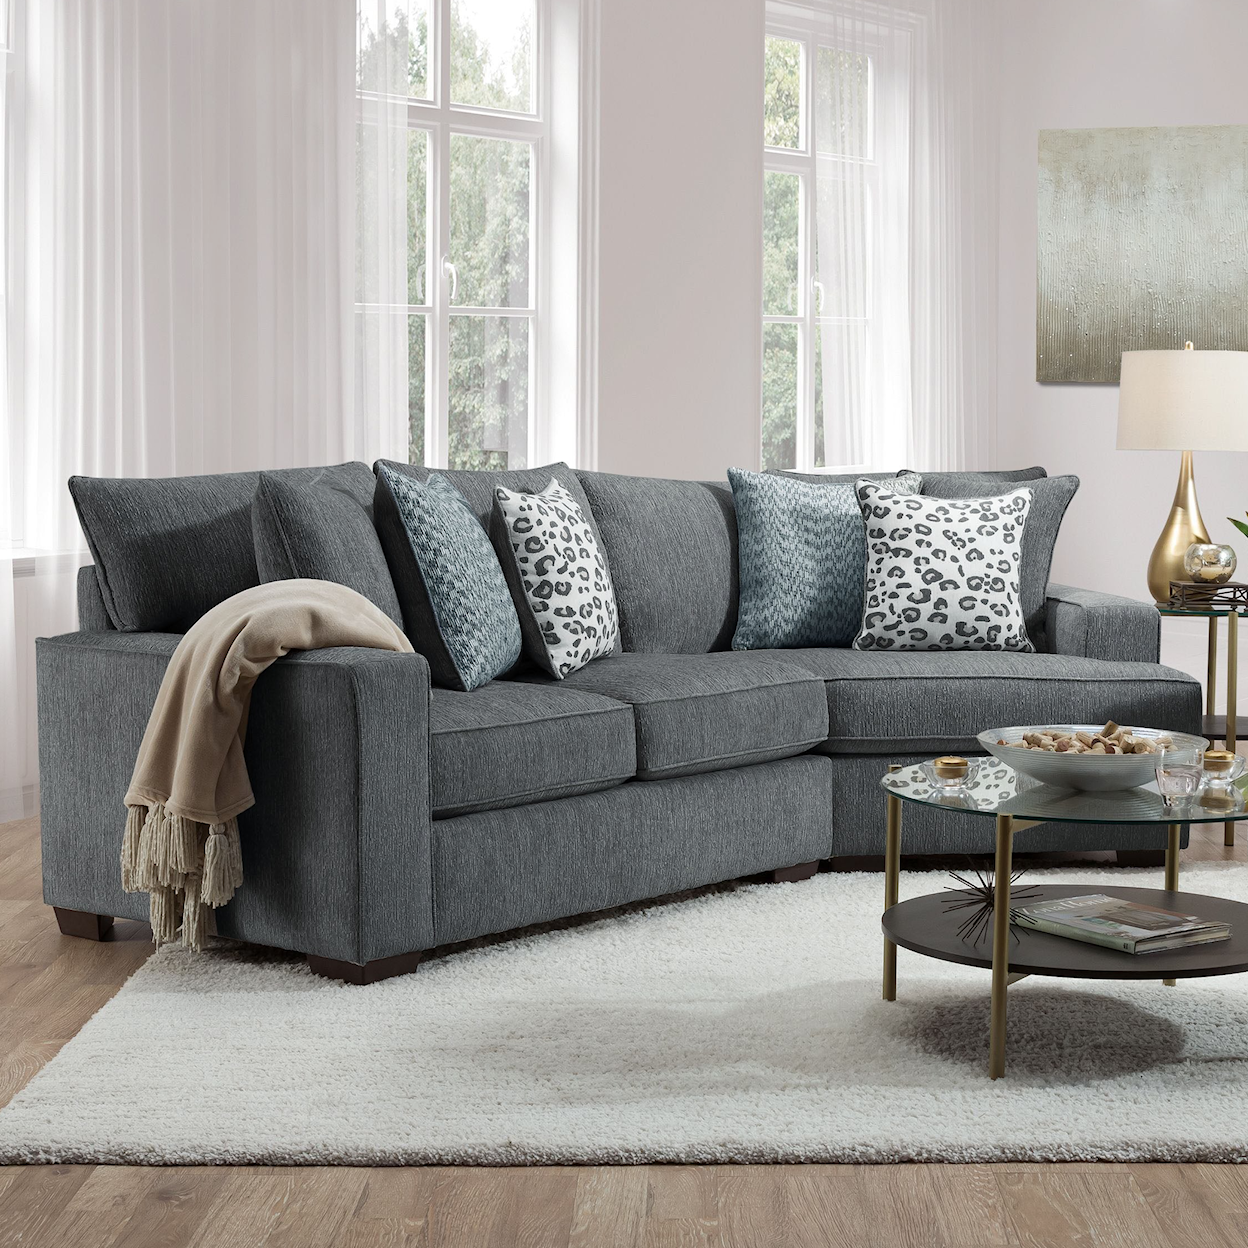 Behold Home 1640 Callaway Sofa with Cuddler